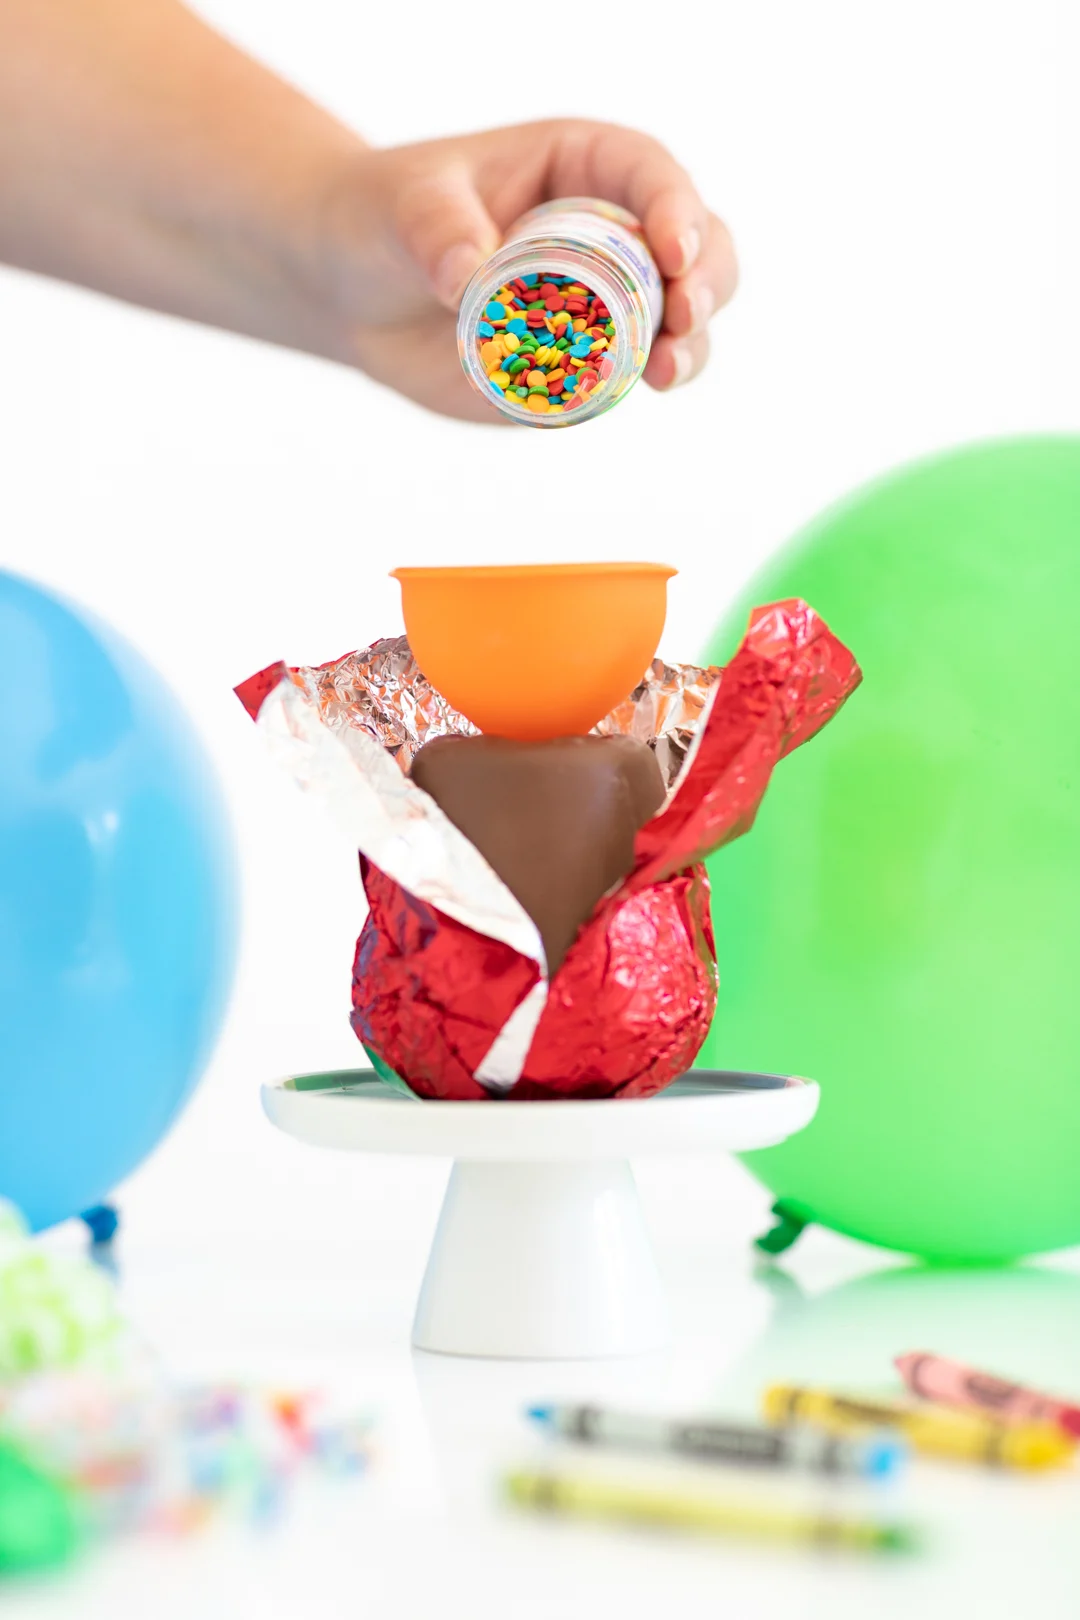 woman pouring sprinkles into a food funnel to get sprinkles into a hollow chocolate apple